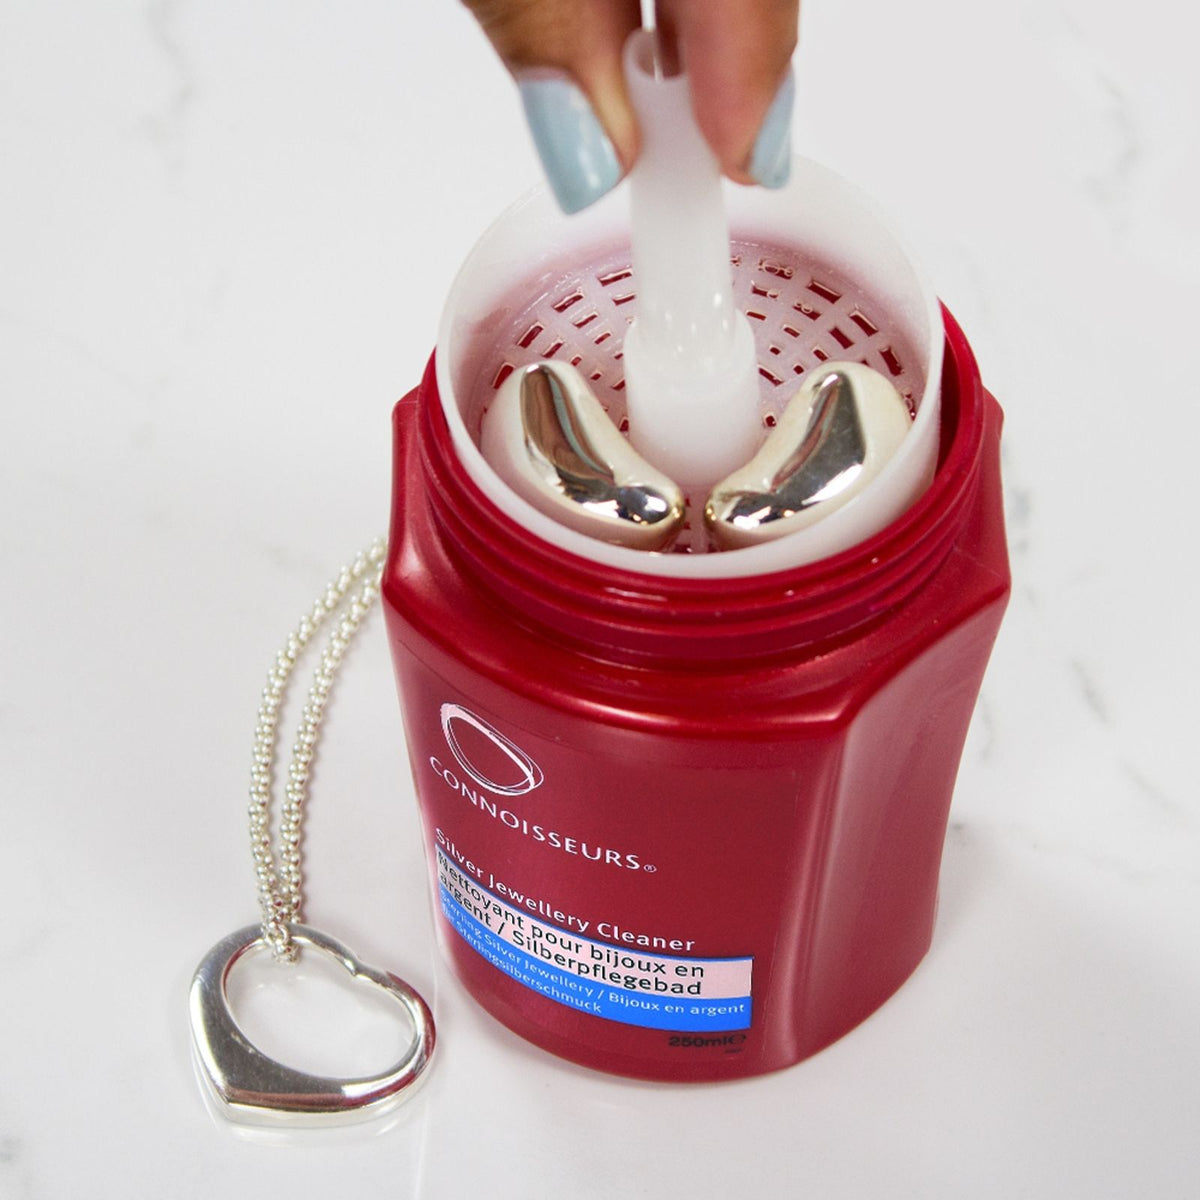 Connoisseurs Silver Jewelry Cleaner 